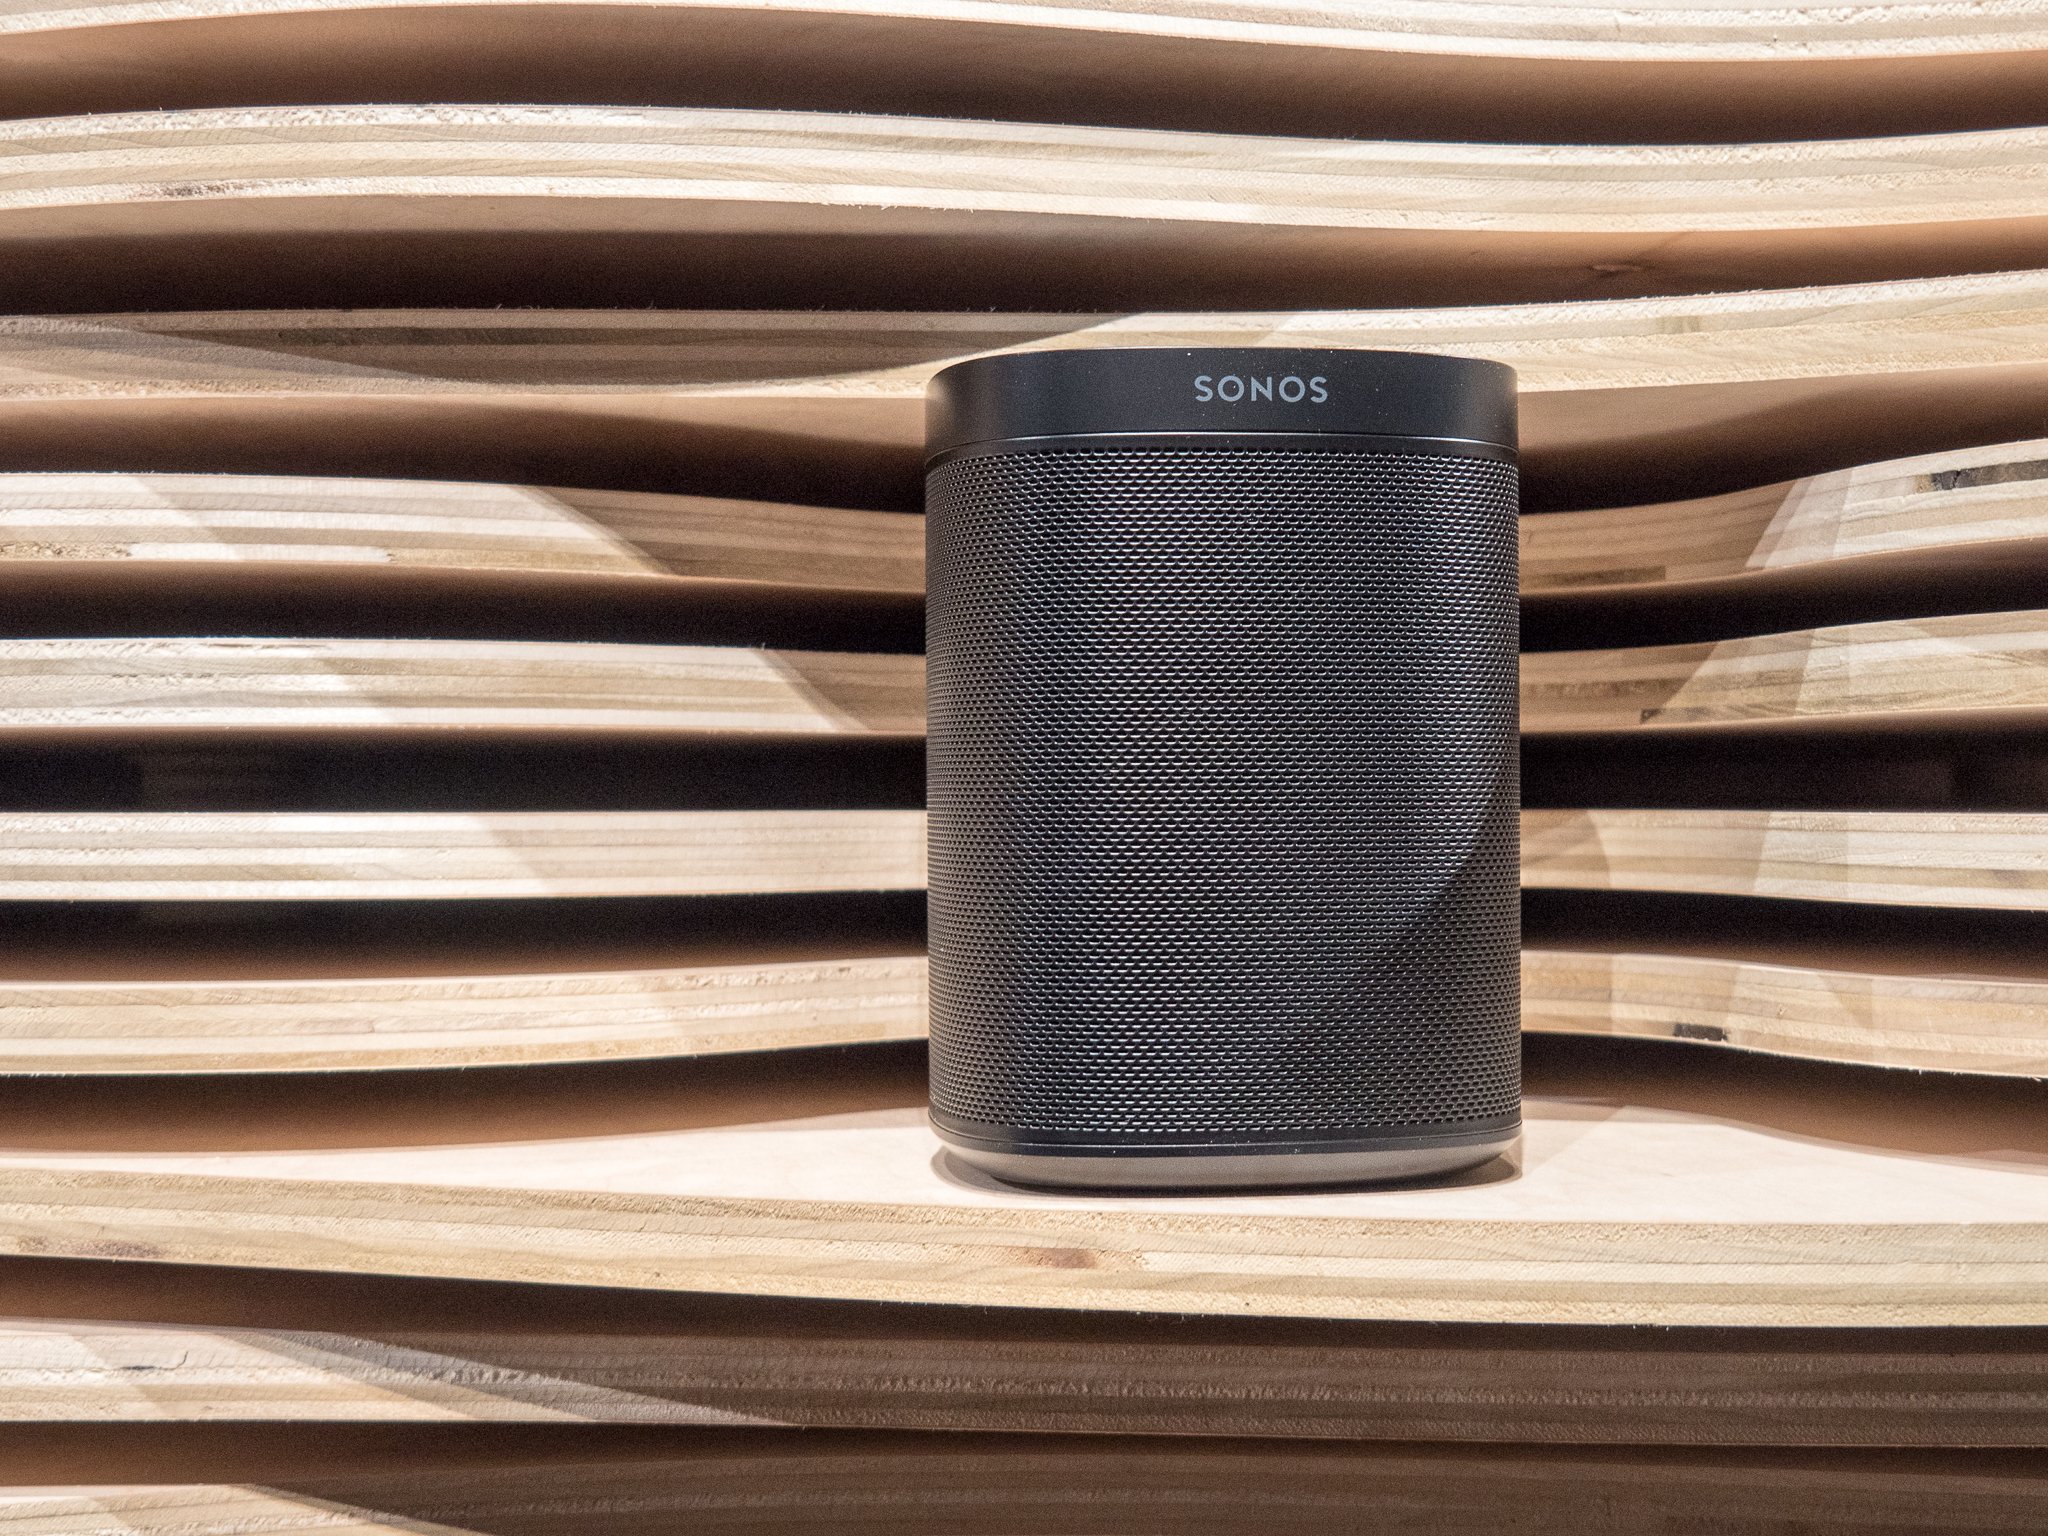 Sonos stop bricking older speakers with its Mode program | Android Central